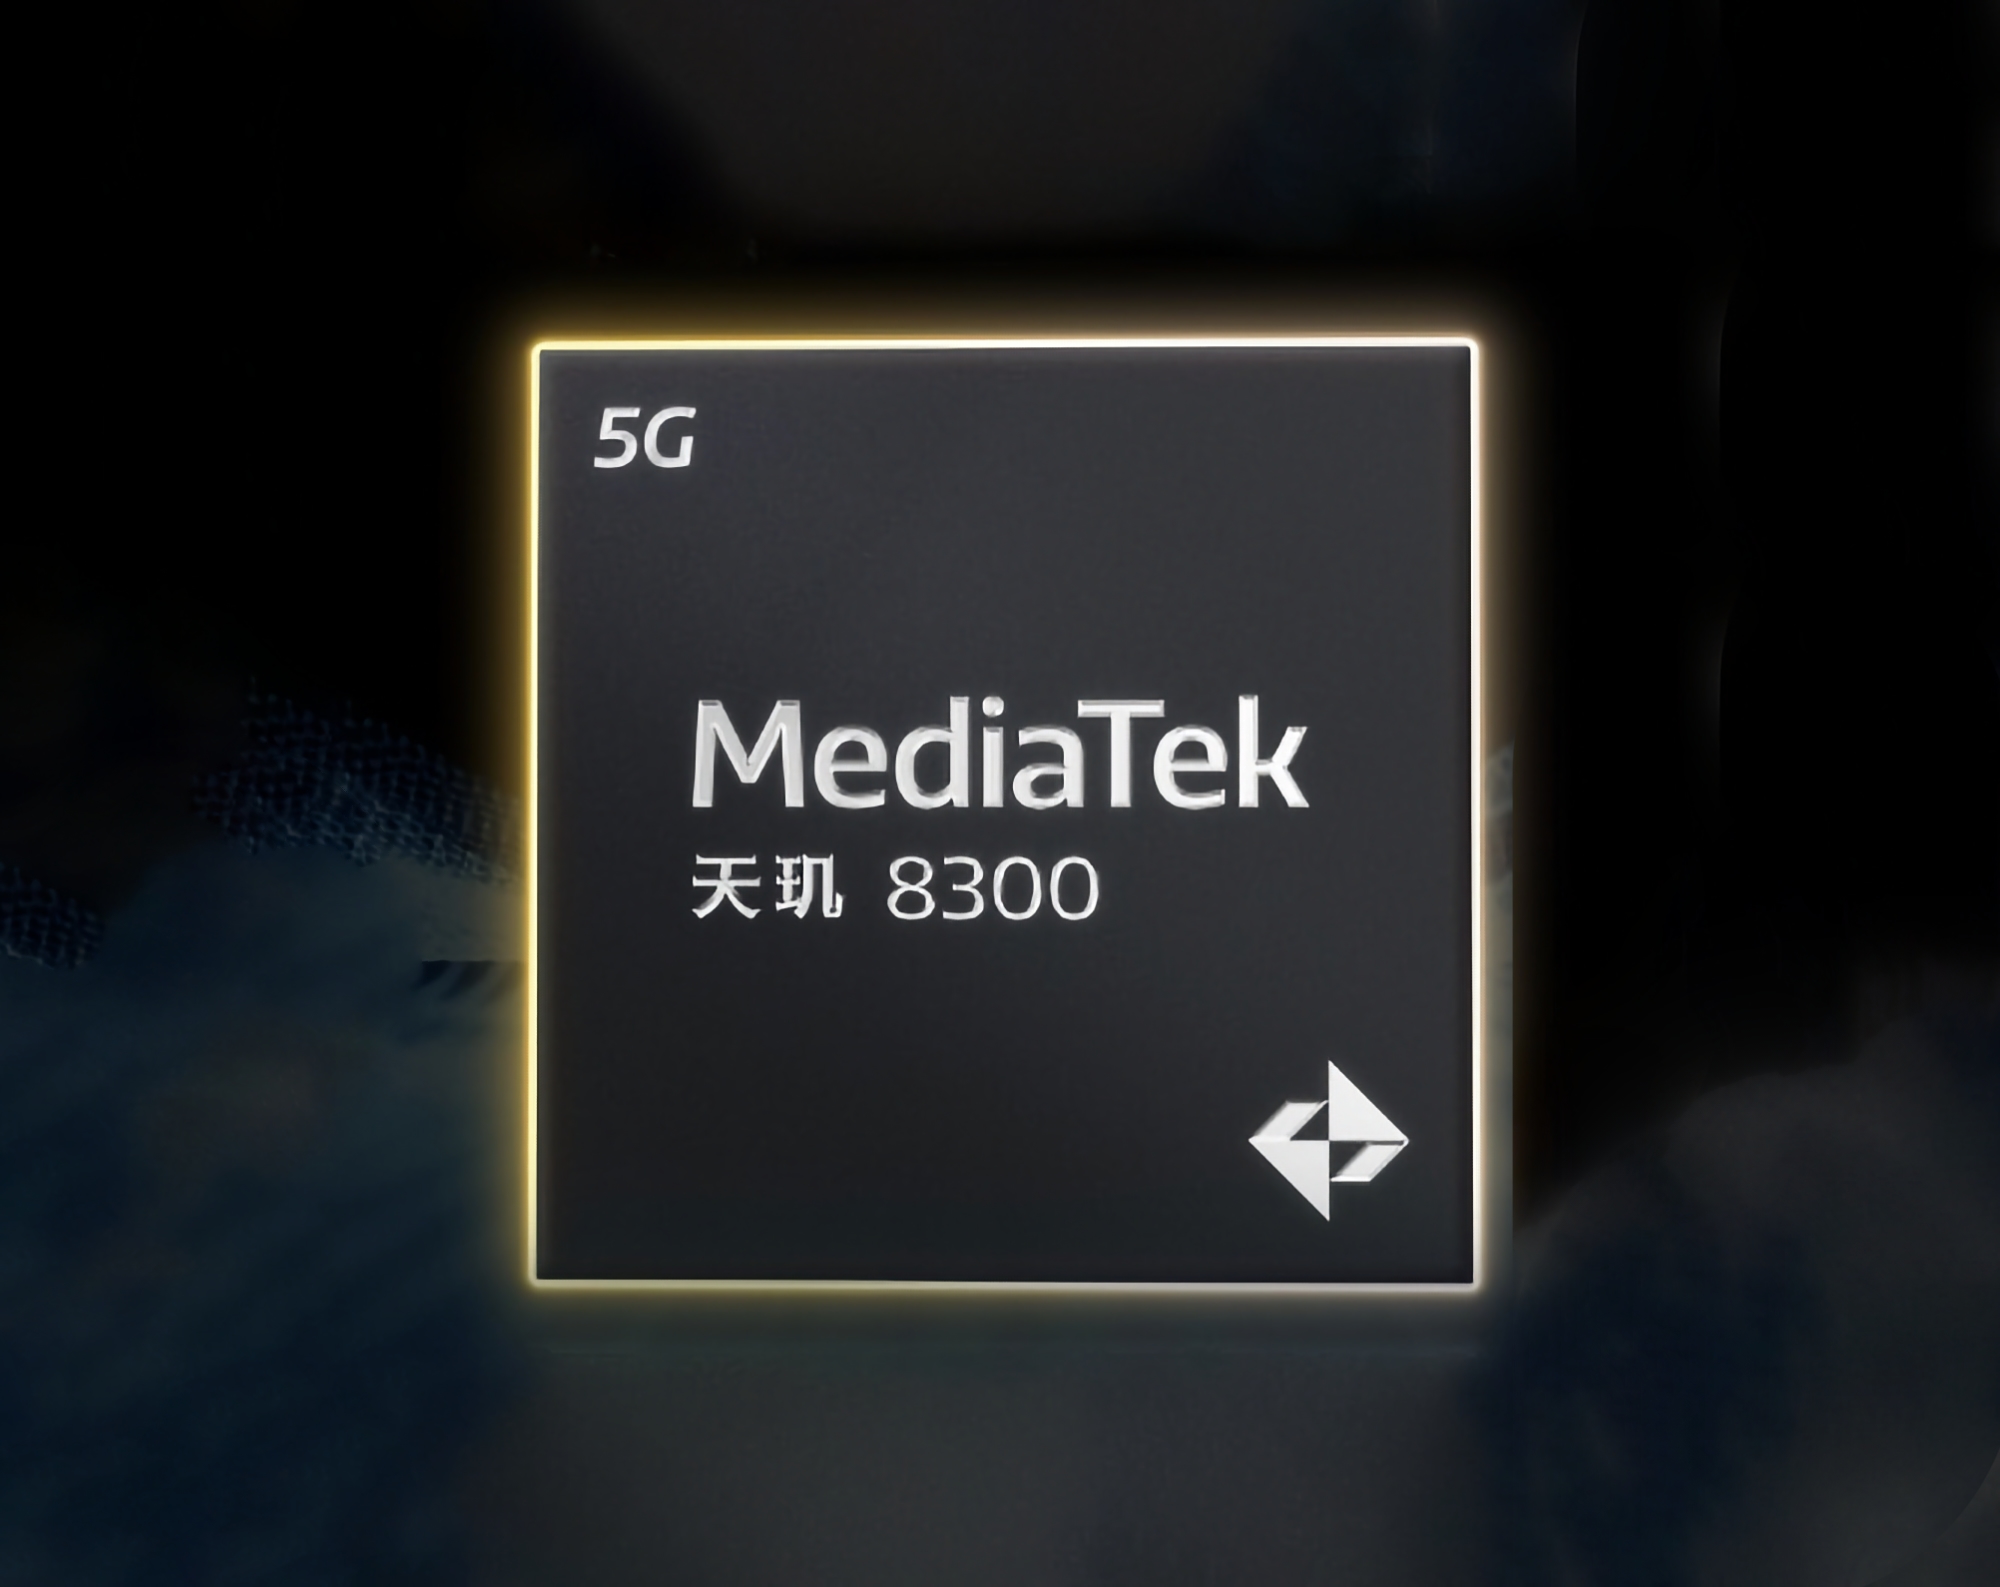 MediaTek unveiled the Dimensity 8300: a dropped version of its flagship Dimensity 9300 chip